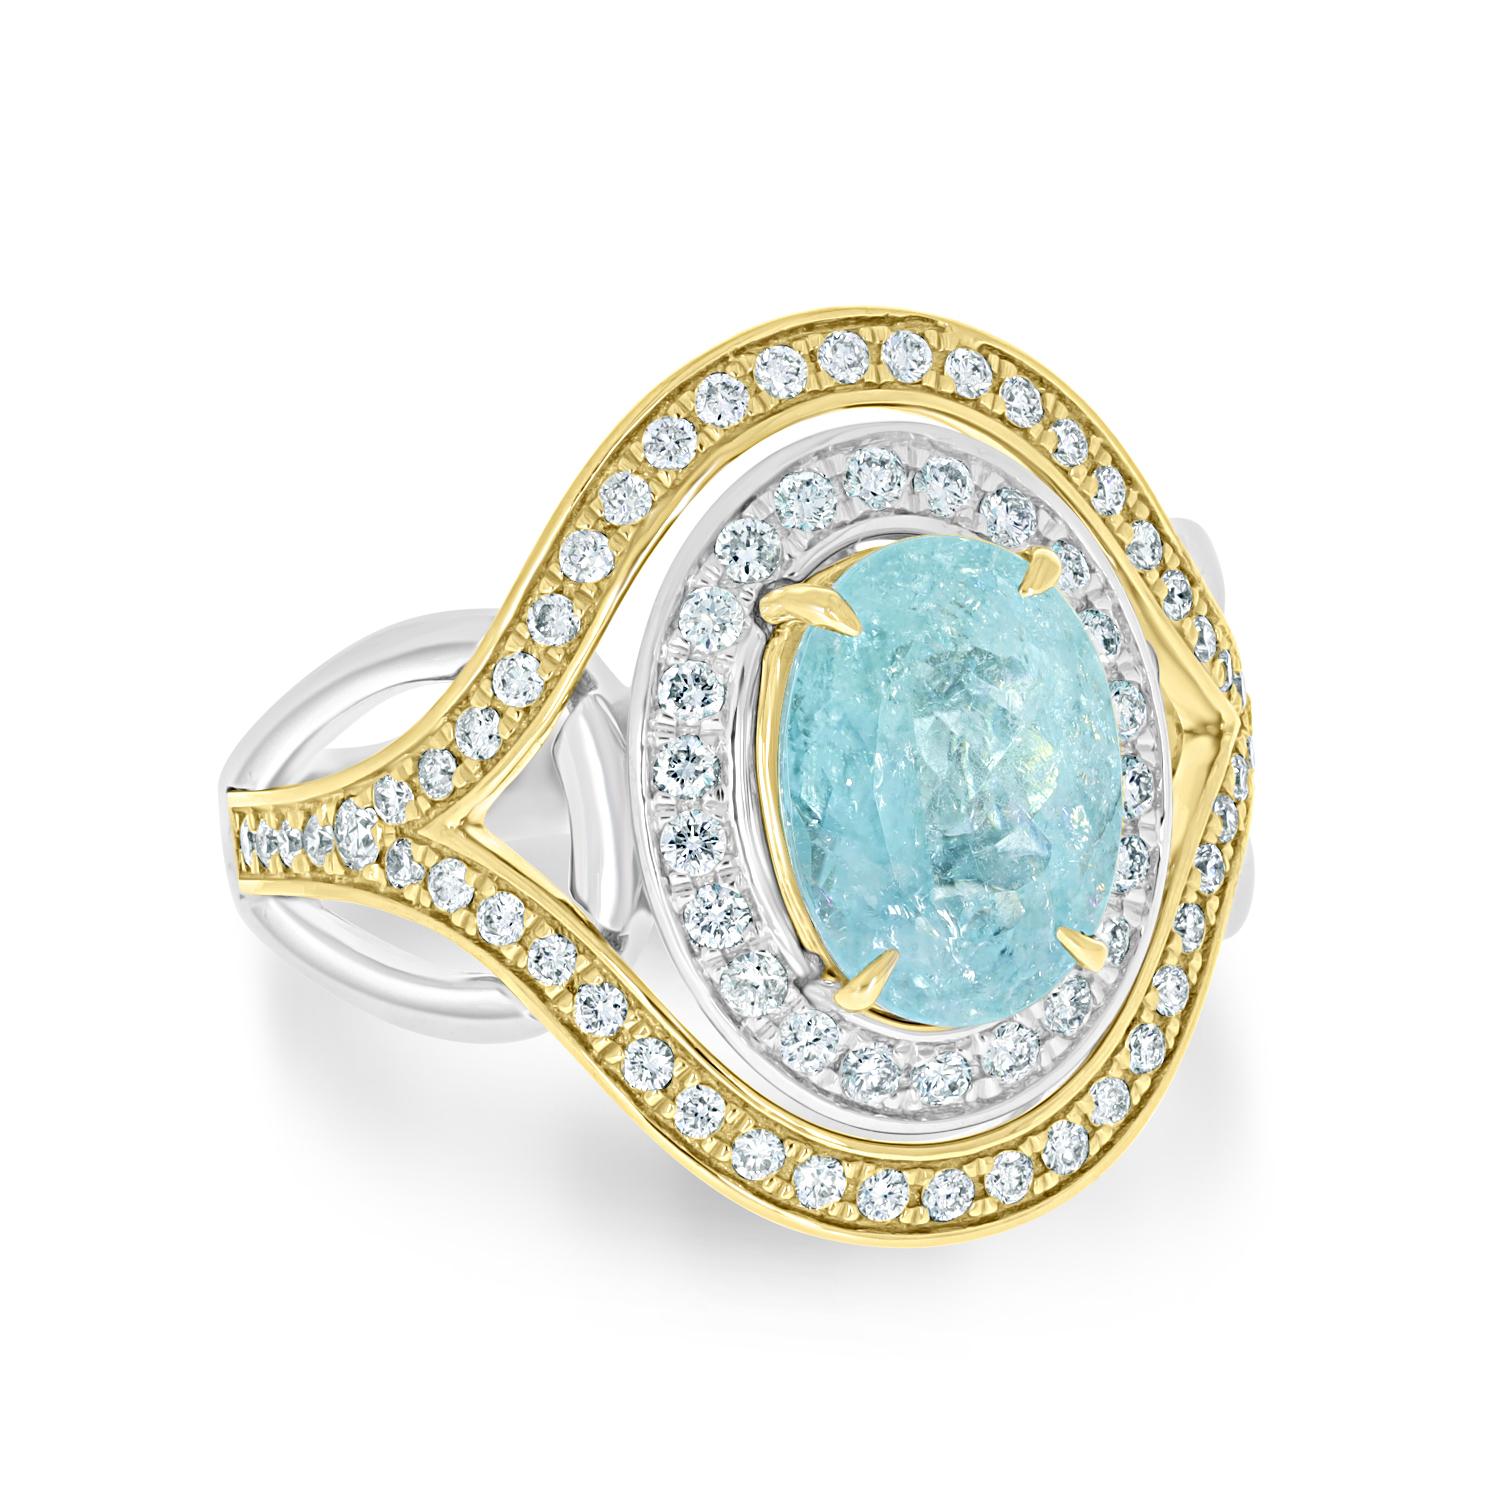 Oval Cut Gem Bleu 2.54ct Paraiba Tourmaline Ring with 0.59ct Diamond in 18K Two-Tone Gold For Sale